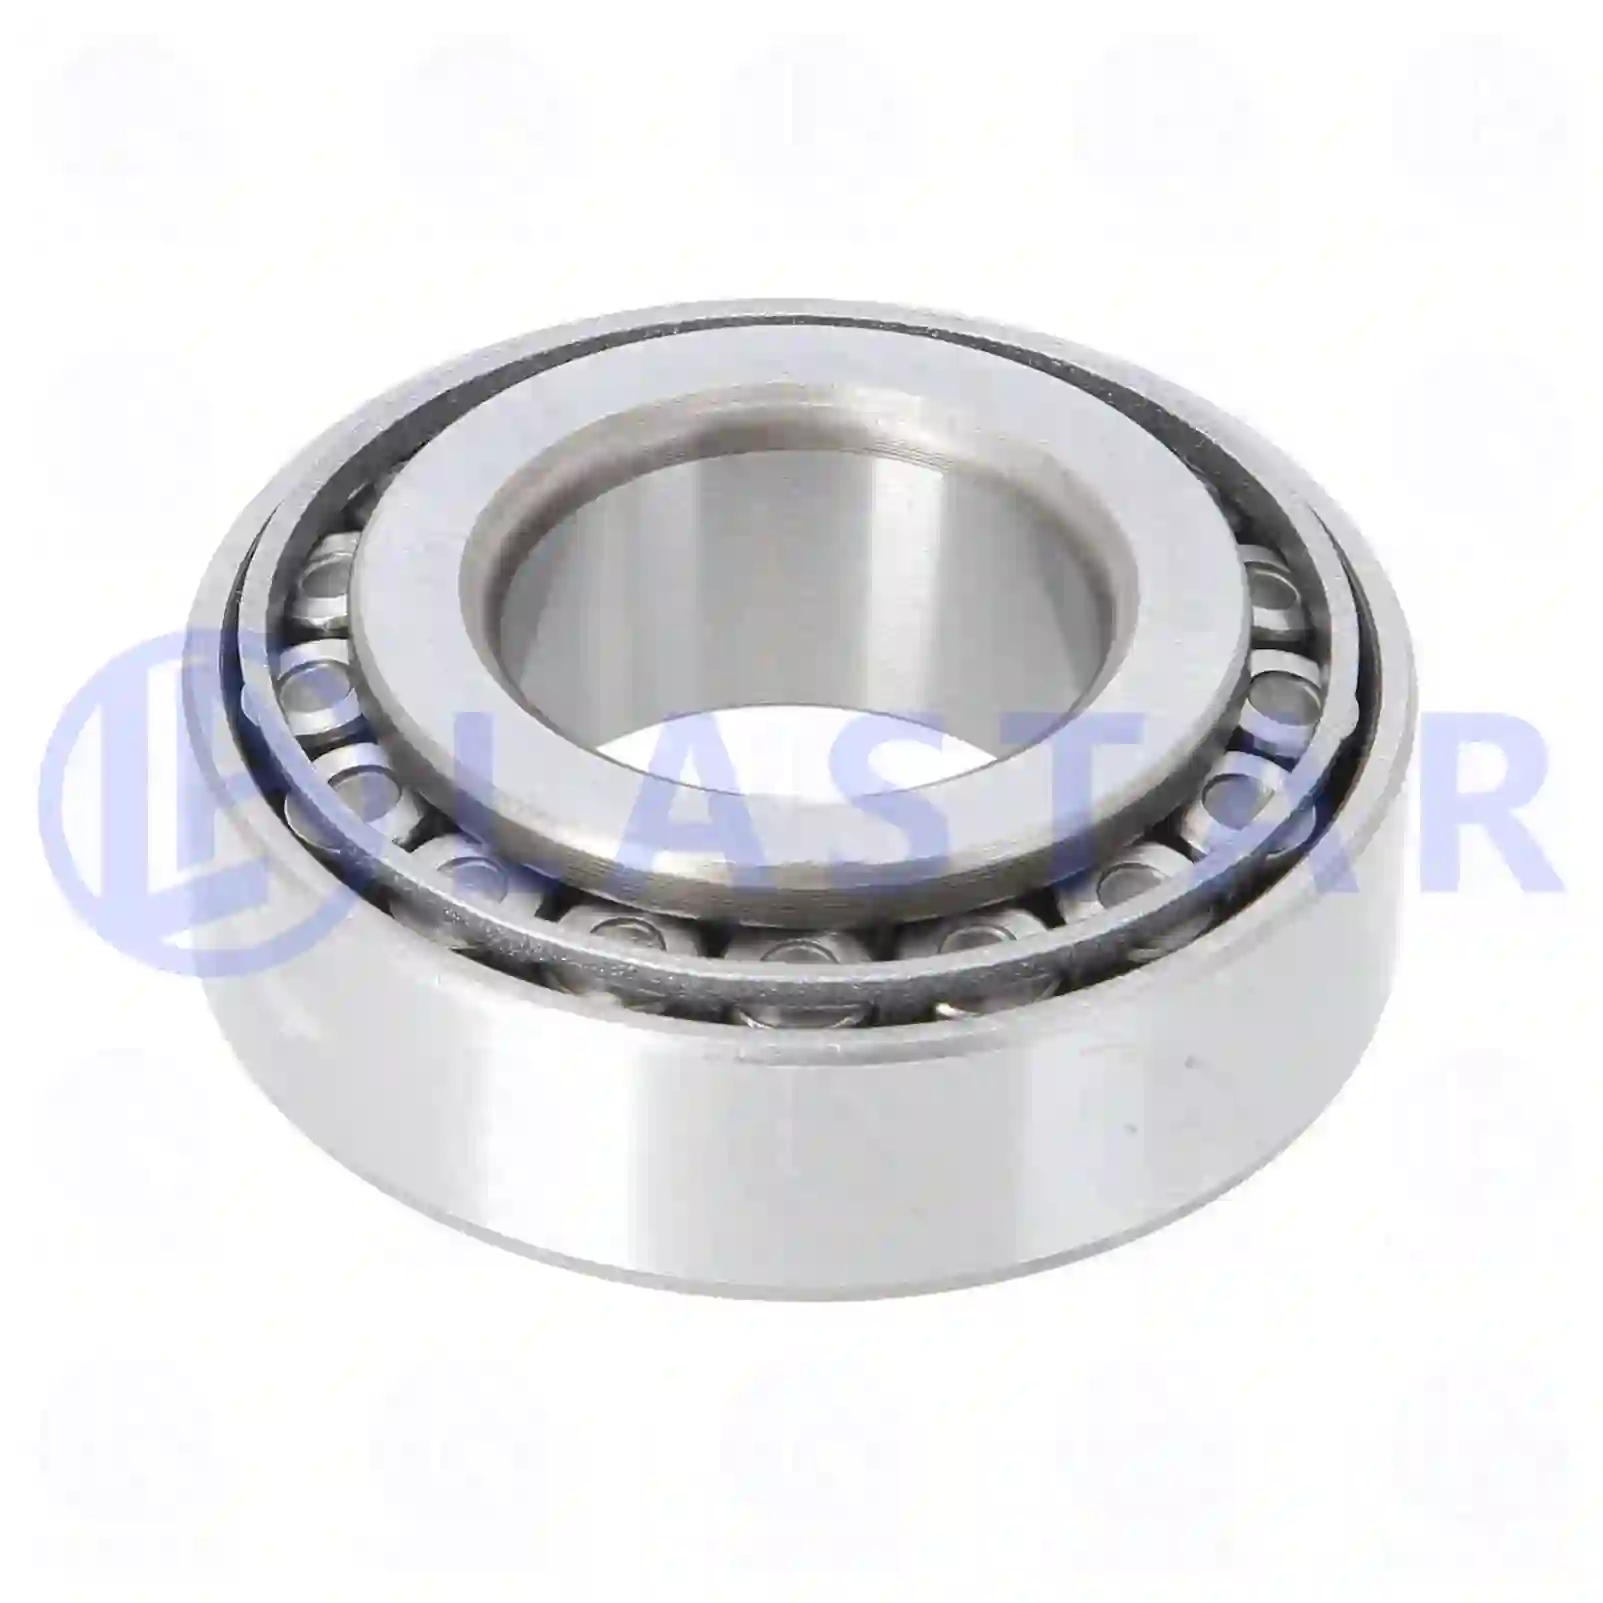 Tapered roller bearing, 77724604, 290062240, 373022, 373518, 373519, 620049, 620053, 0491899, 1344221, 1400078, 140078, 164670, 491899, NAK9186, 900436601700, TK4210416, 00814138, 05996248, 26800120, 94020002, 94205016, 94249643, 5-09812025-0, 5-09812026-0, 5-09812027-0, 8-94249643-2, 9-00032206-0, 01100000, 01110000, 01905272, 05996248, 08835016, 08857787, 00755-27210, 00632499006, 06324990066, 06324990080, 06342990066, A0023432206, A0773220600, 075527210, 805127142, 0009813105, 000720032206, 0019811505, 0019816105, 0019816505, 0029801302, 0079817605, MB025004, MH043145, 32273-M5100, 38120-18000, 38120-1KD0A, 466667, 373022, 373518, 373519, 620049, 620053, 0007732206, 0023336266, 0023432206, 0959232206, 5516010506, 5516016470, 5516016472, 7703090085, 123631, 183583, 19553, 6601861, 7019553, ZG03022-0008 ||  77724604 Lastar Spare Part | Truck Spare Parts, Auotomotive Spare Parts Tapered roller bearing, 77724604, 290062240, 373022, 373518, 373519, 620049, 620053, 0491899, 1344221, 1400078, 140078, 164670, 491899, NAK9186, 900436601700, TK4210416, 00814138, 05996248, 26800120, 94020002, 94205016, 94249643, 5-09812025-0, 5-09812026-0, 5-09812027-0, 8-94249643-2, 9-00032206-0, 01100000, 01110000, 01905272, 05996248, 08835016, 08857787, 00755-27210, 00632499006, 06324990066, 06324990080, 06342990066, A0023432206, A0773220600, 075527210, 805127142, 0009813105, 000720032206, 0019811505, 0019816105, 0019816505, 0029801302, 0079817605, MB025004, MH043145, 32273-M5100, 38120-18000, 38120-1KD0A, 466667, 373022, 373518, 373519, 620049, 620053, 0007732206, 0023336266, 0023432206, 0959232206, 5516010506, 5516016470, 5516016472, 7703090085, 123631, 183583, 19553, 6601861, 7019553, ZG03022-0008 ||  77724604 Lastar Spare Part | Truck Spare Parts, Auotomotive Spare Parts